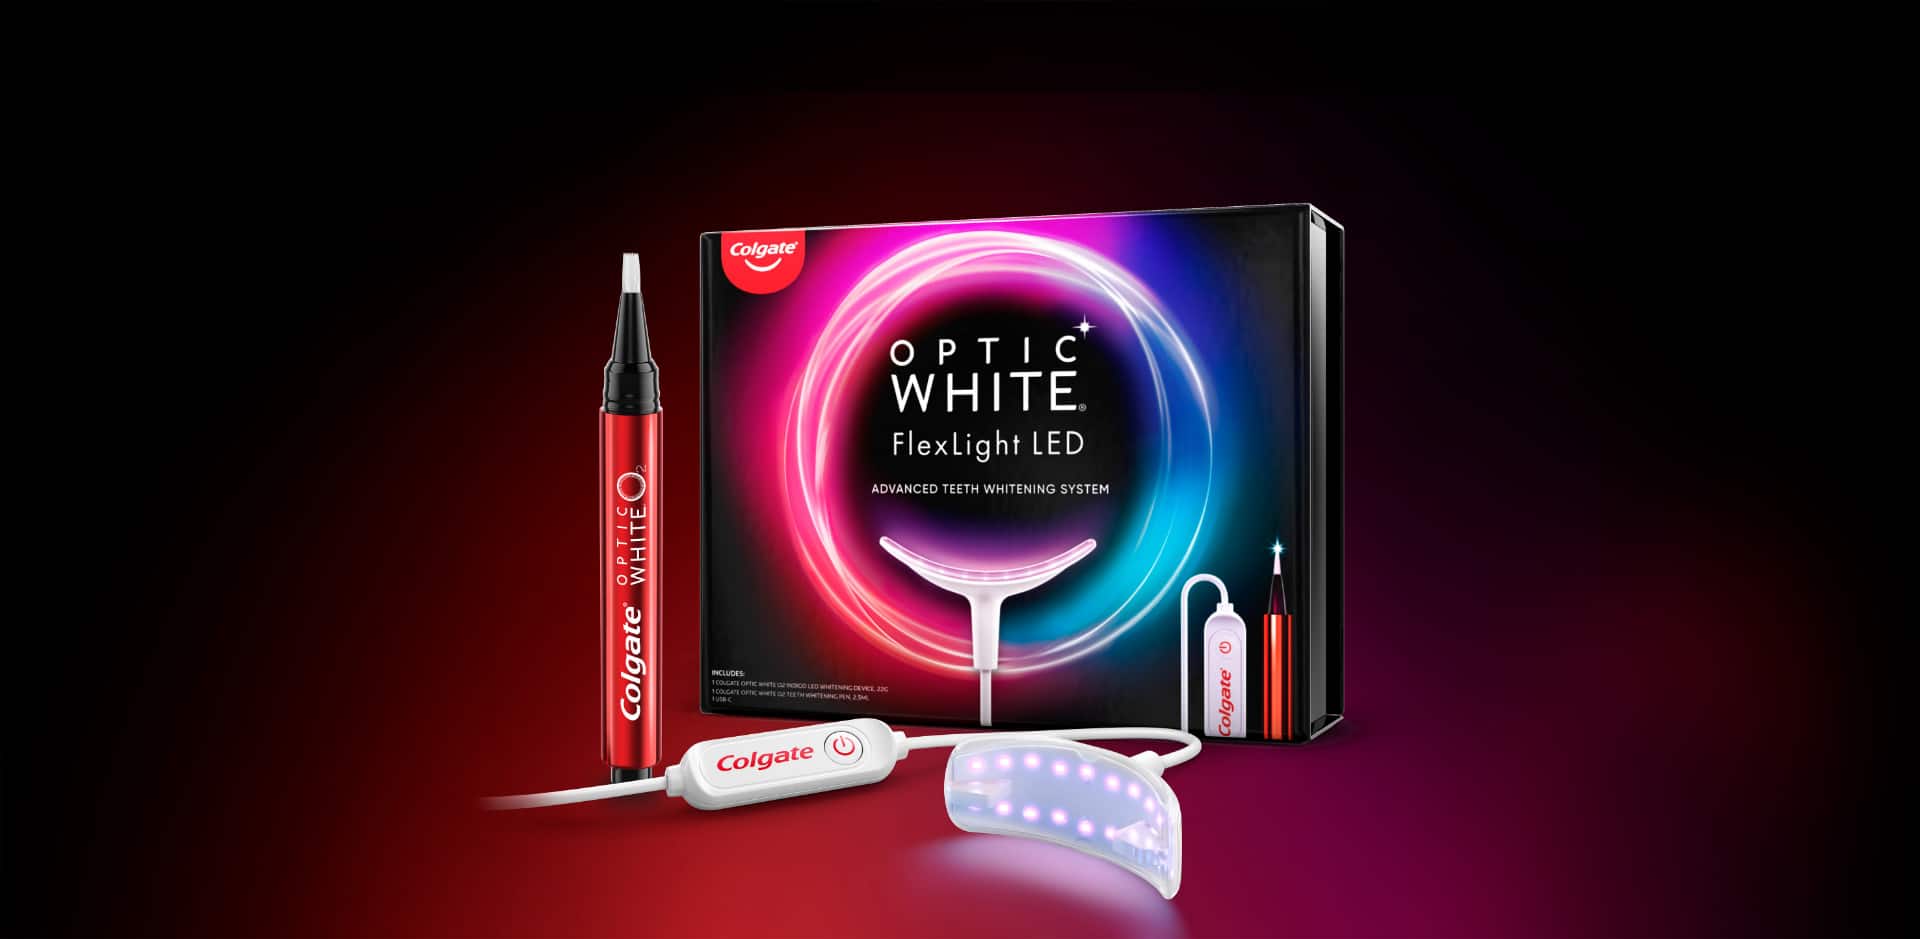 Colgate® Optic White® FlexLight LED Kit - Created with revolutionary Indigo Light technology that professionals use to supercharge the whitening actions